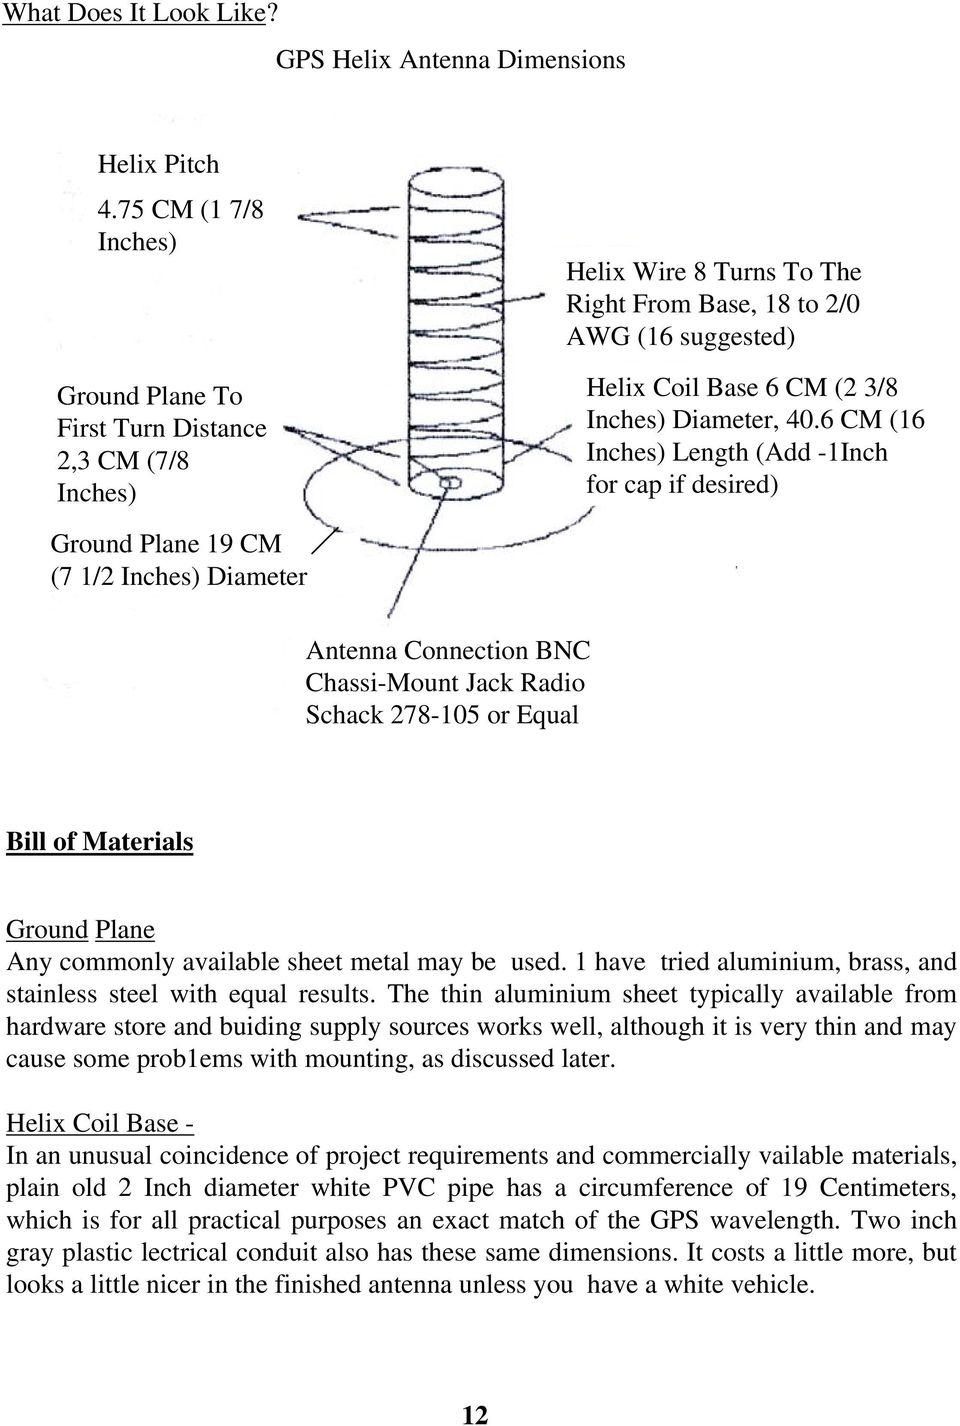 6 CM (16 Inches) Length (Add -1Inch for cap if desired) Ground Plane 19 CM (7 1/2 Inches) Diameter Antenna Connection BNC Chassi-Mount Jack Radio Schack 278-105 or Equal Bill of Materials Ground